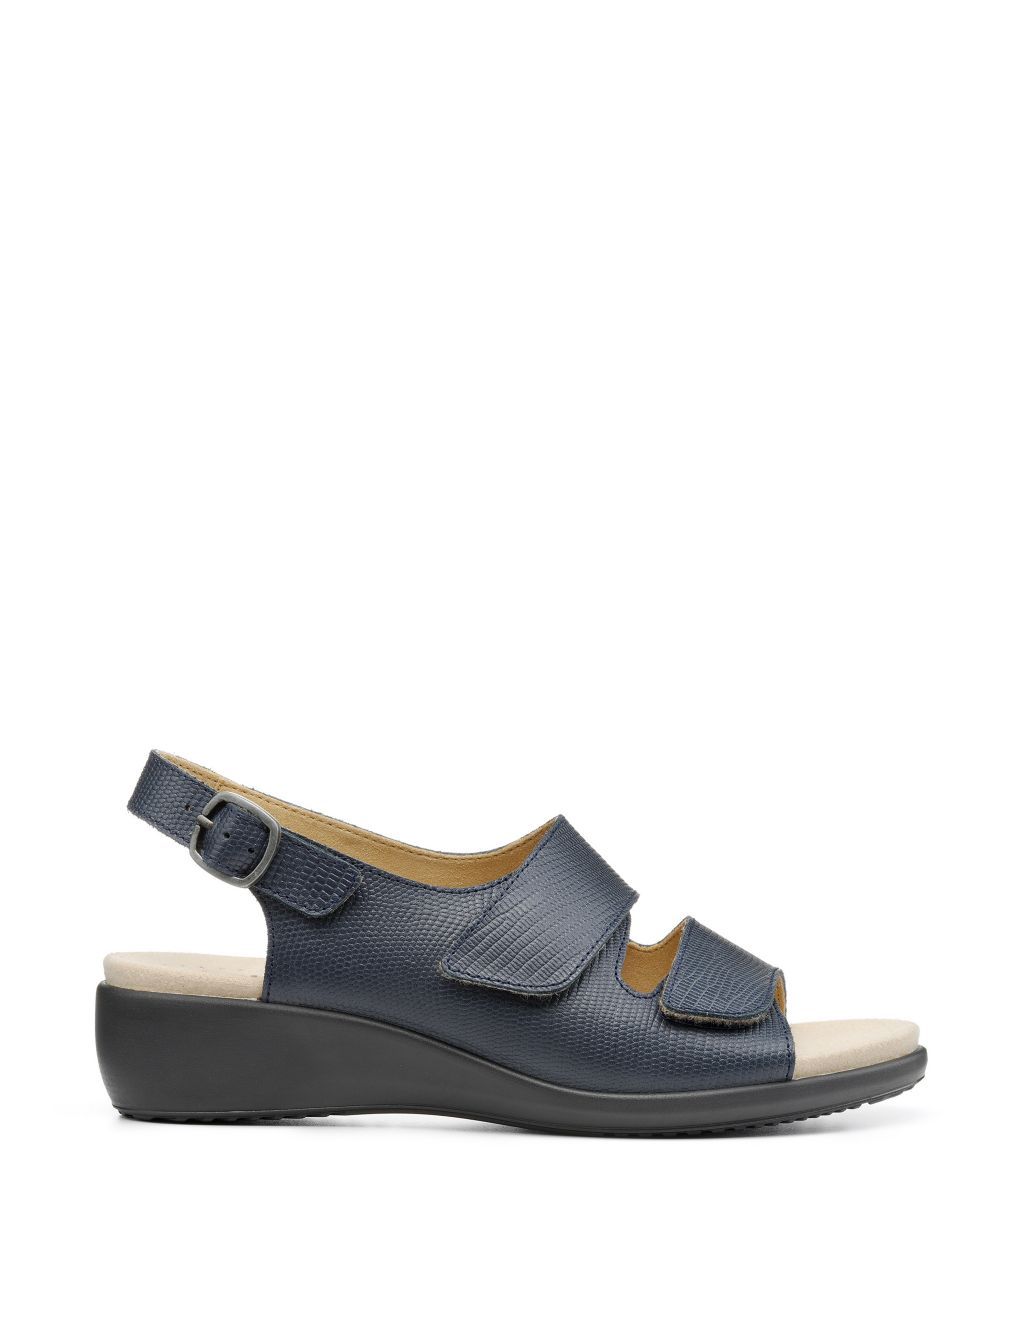 Easy II Wide Fit Leather Wedge Sandals | Hotter | M&S